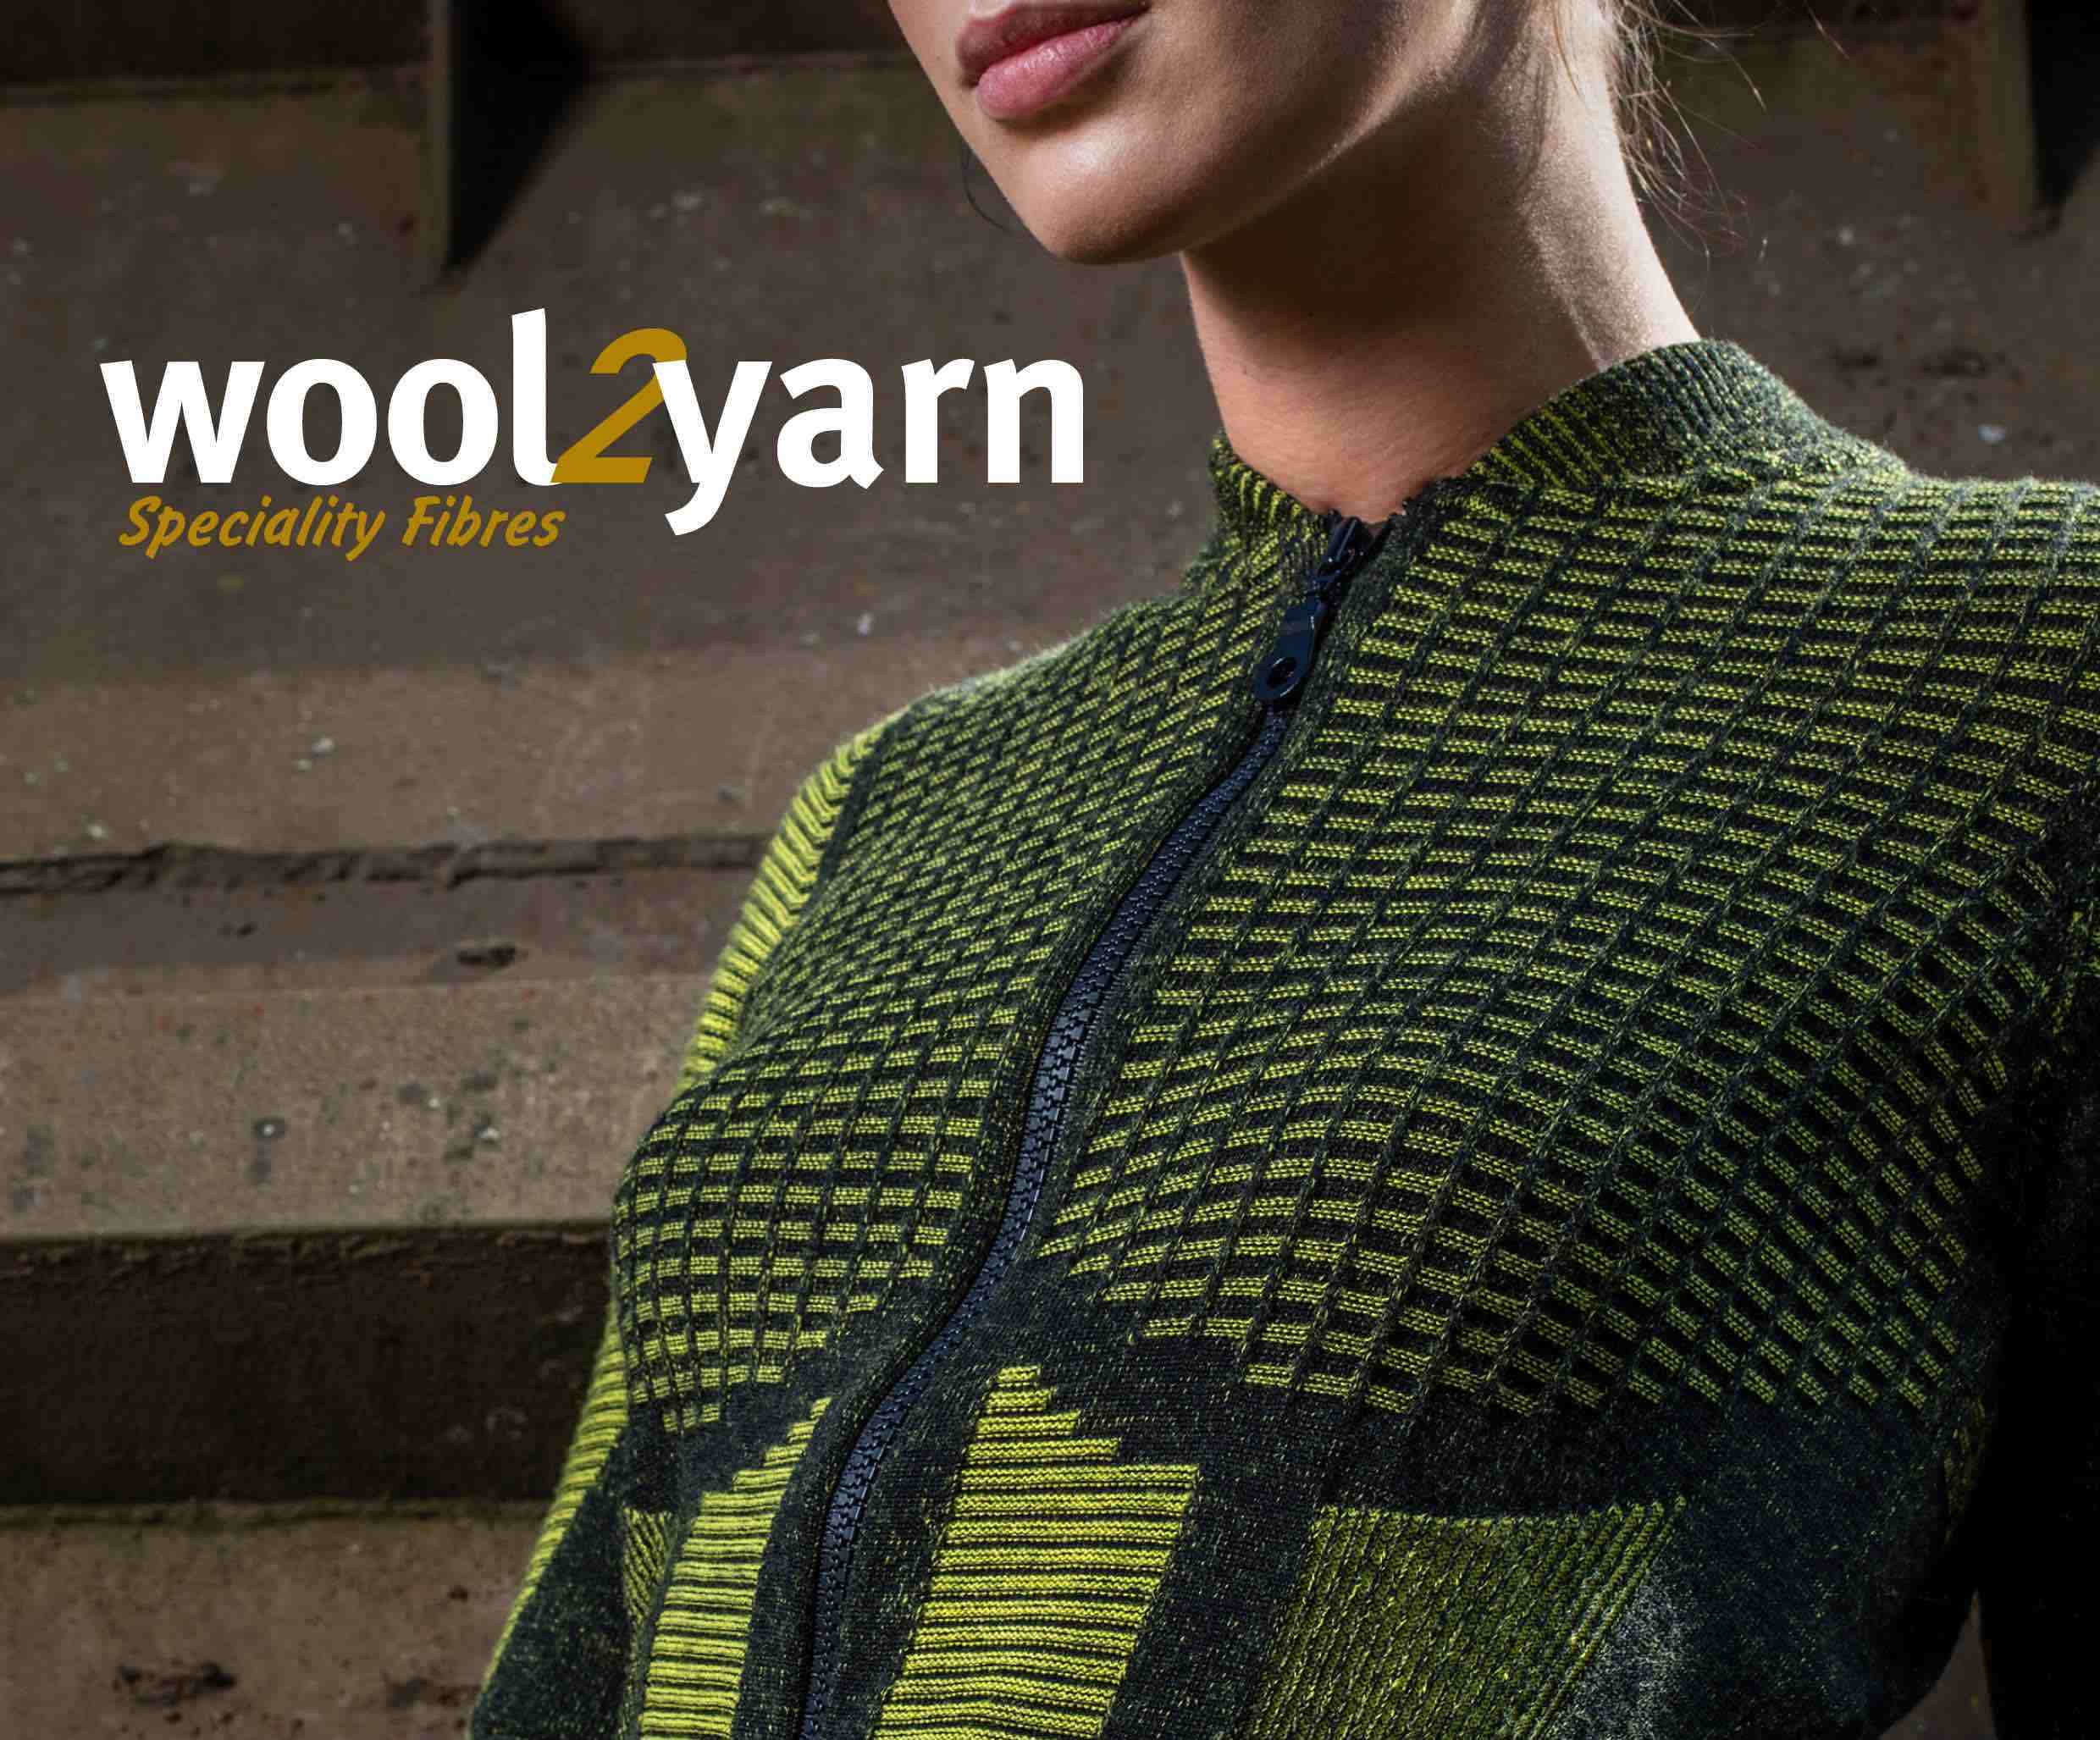 2020 issues of wool2yarn magazines will be published in November